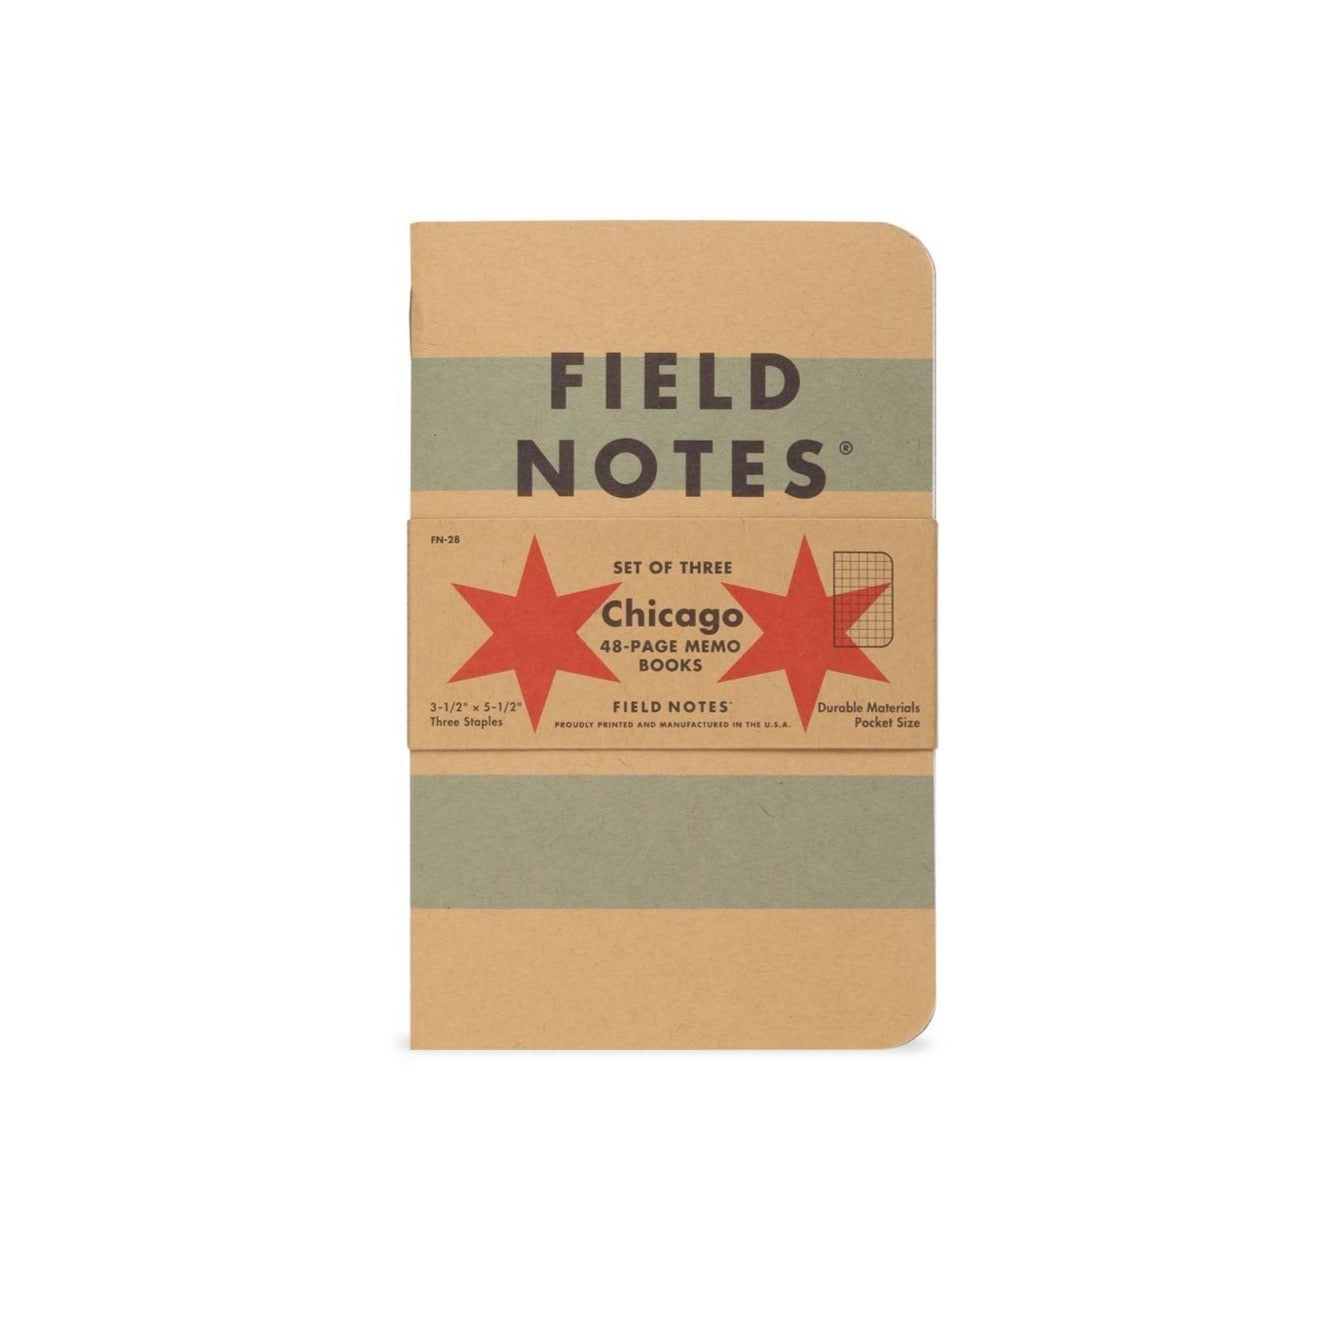 Field Notes "Chicago" Edition 3-Pack